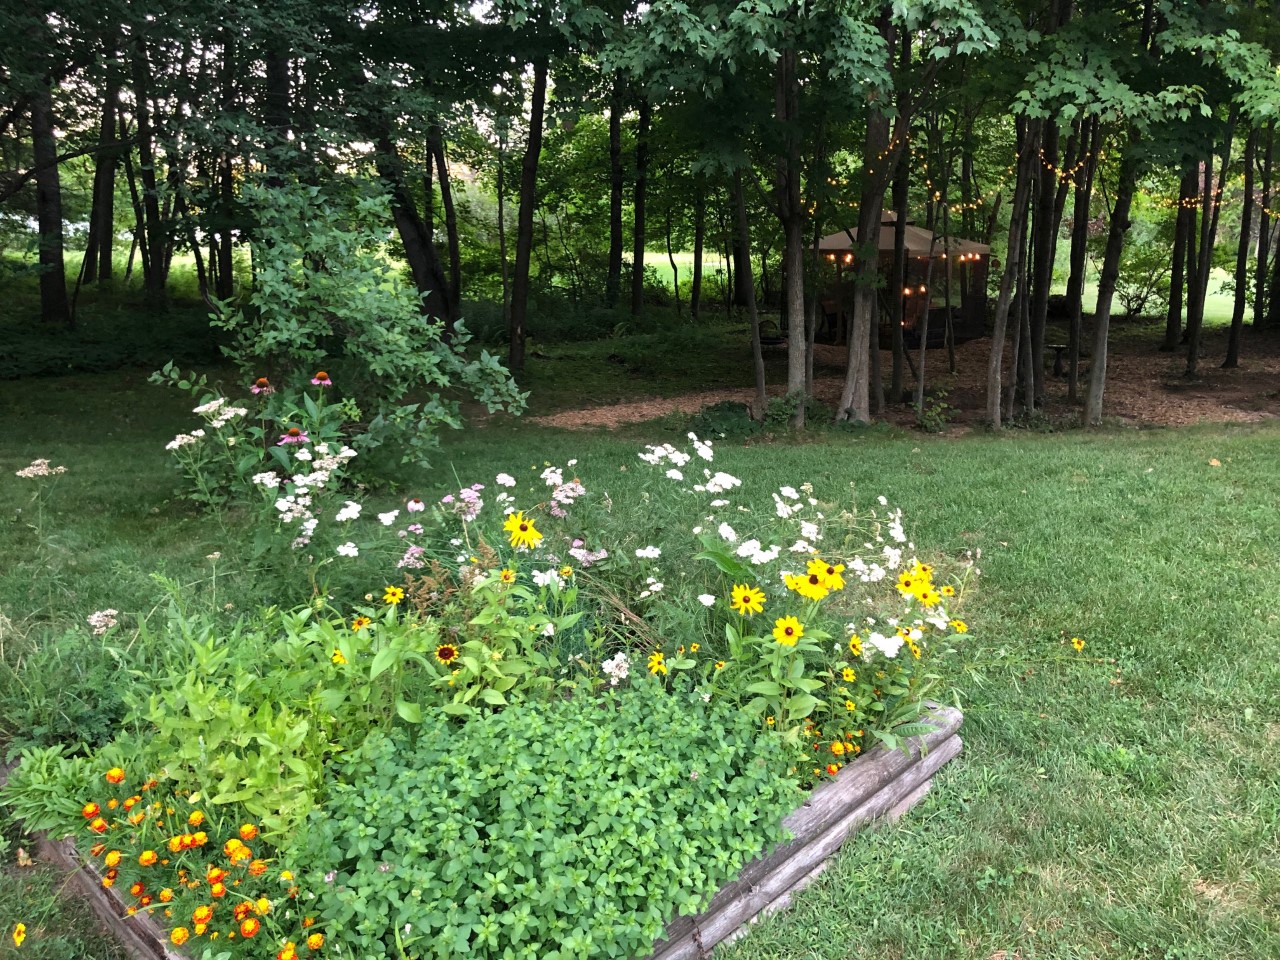 photo of shady backyard with wildflowers in a planter in the foreground